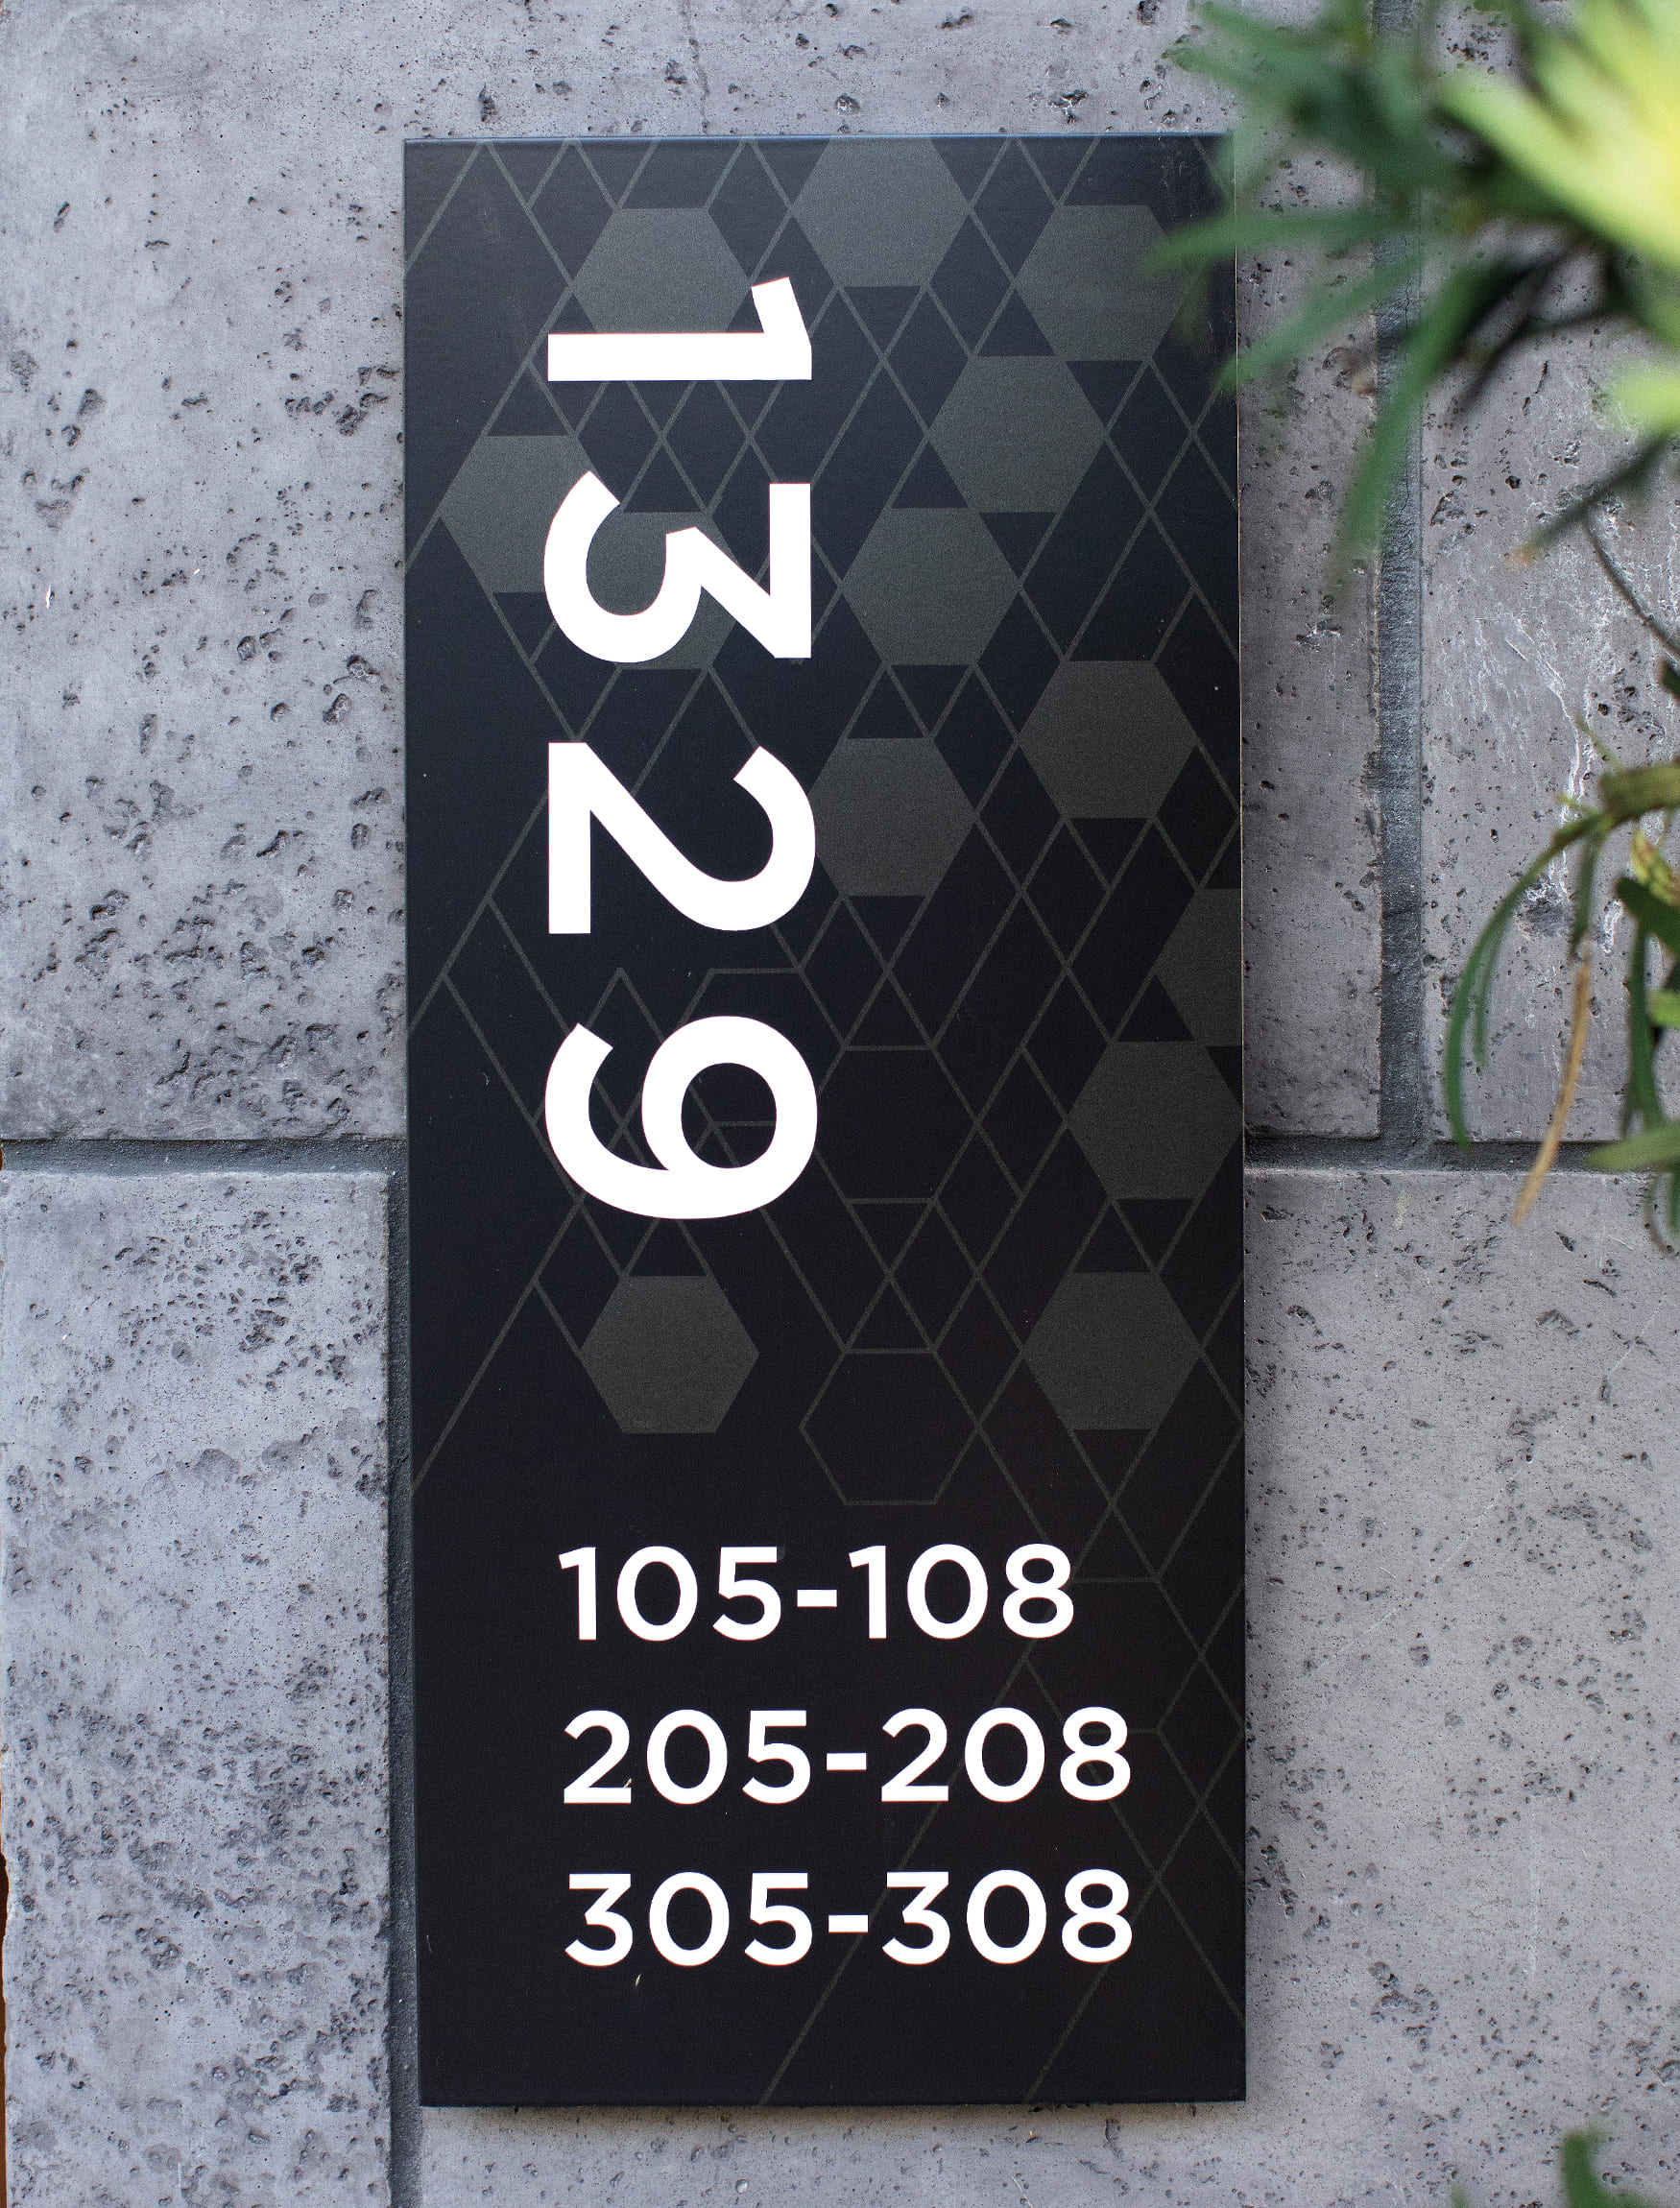 Black veritcal wall mounted building information plaque with unit numbers and building number in white and printed tonal grey hexagonal pattern. Signage and wayfinding for Persea in San Diego, California by RSM Design